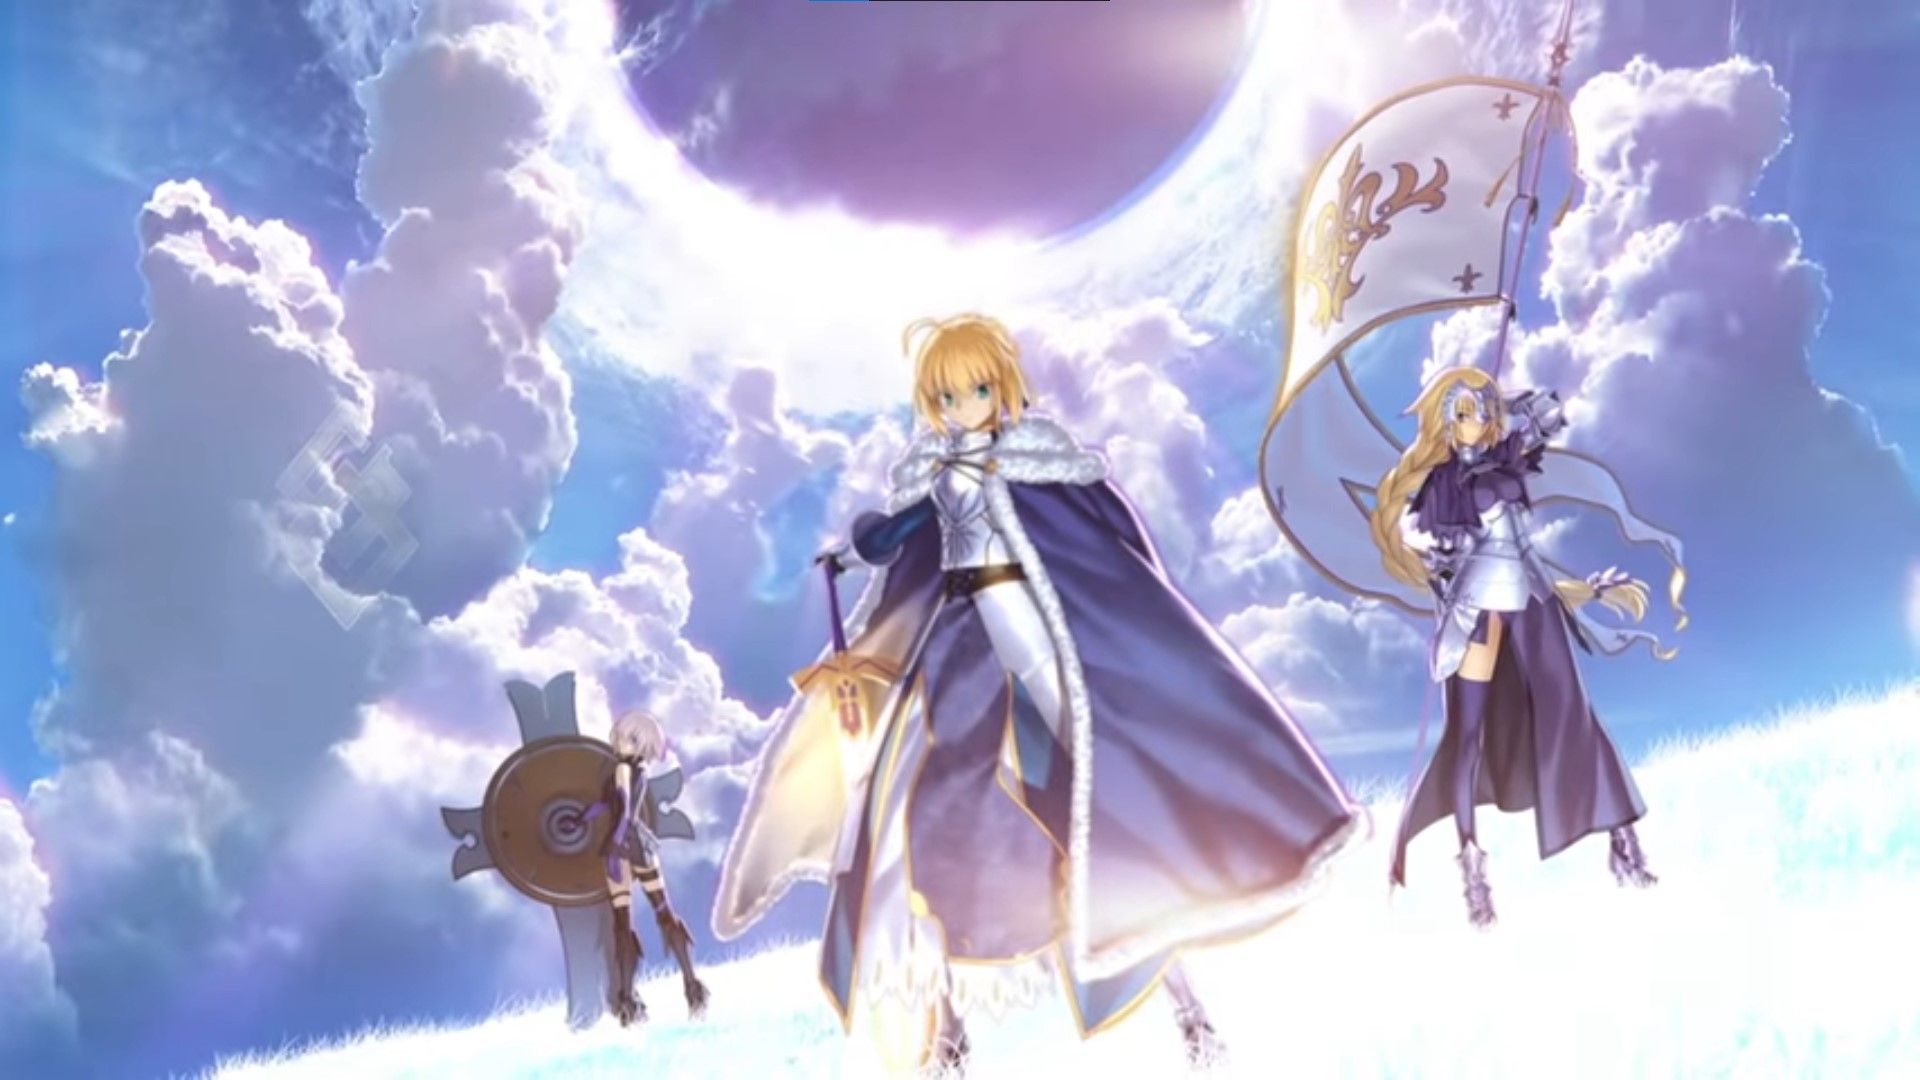 'Fate/Grand Order': Free SSR Ticket Coming This Month | IBTimes